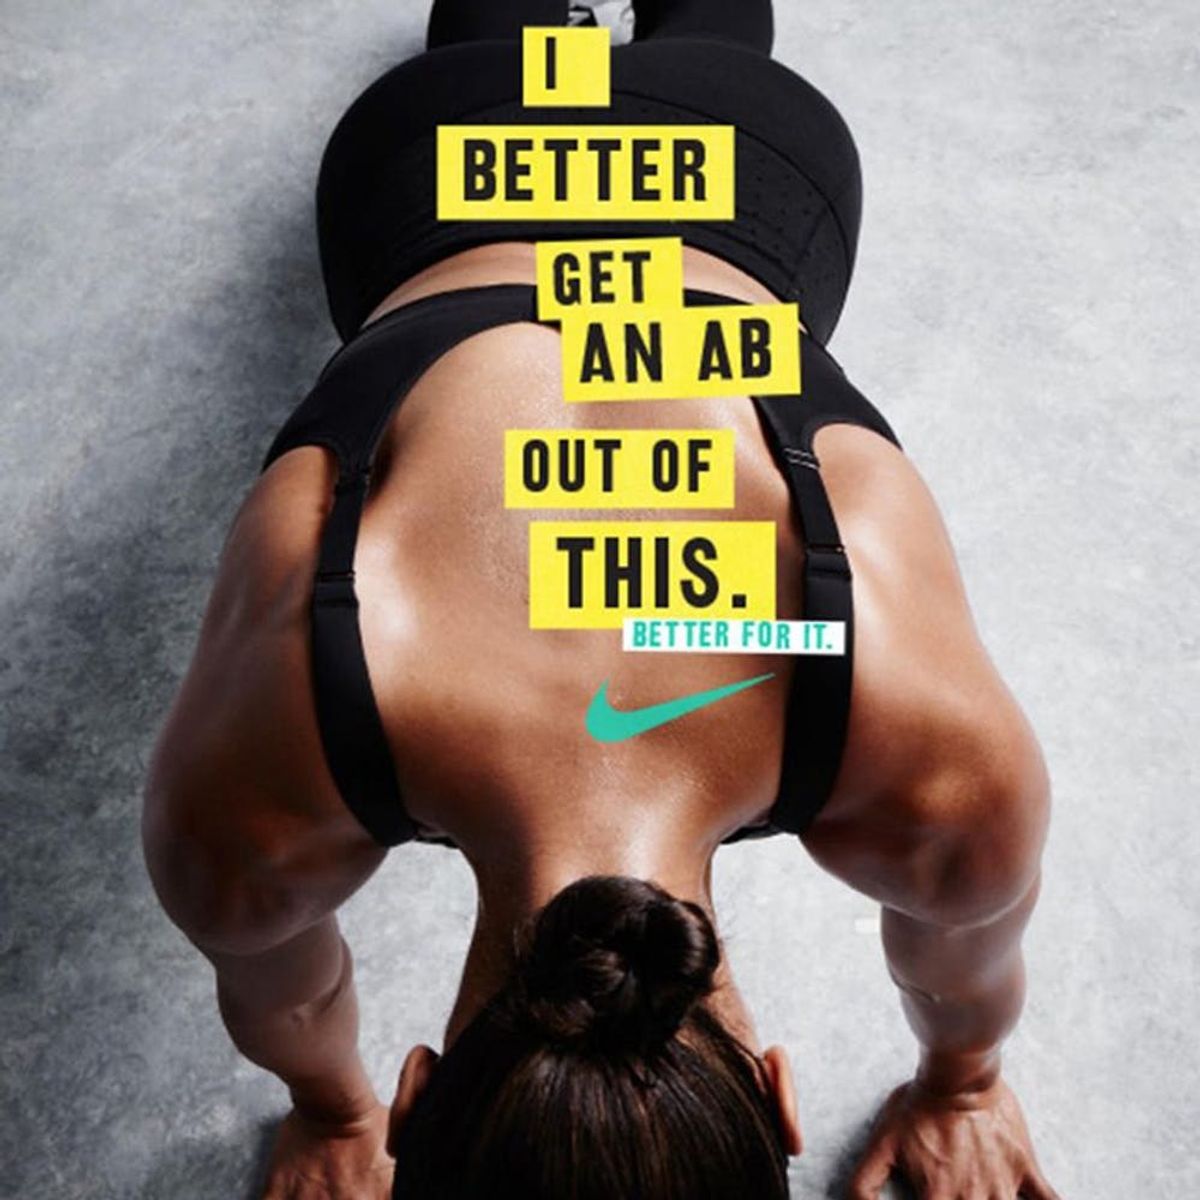 Nike’s New Campaign Might Be the Realest Workout Motivation Yet